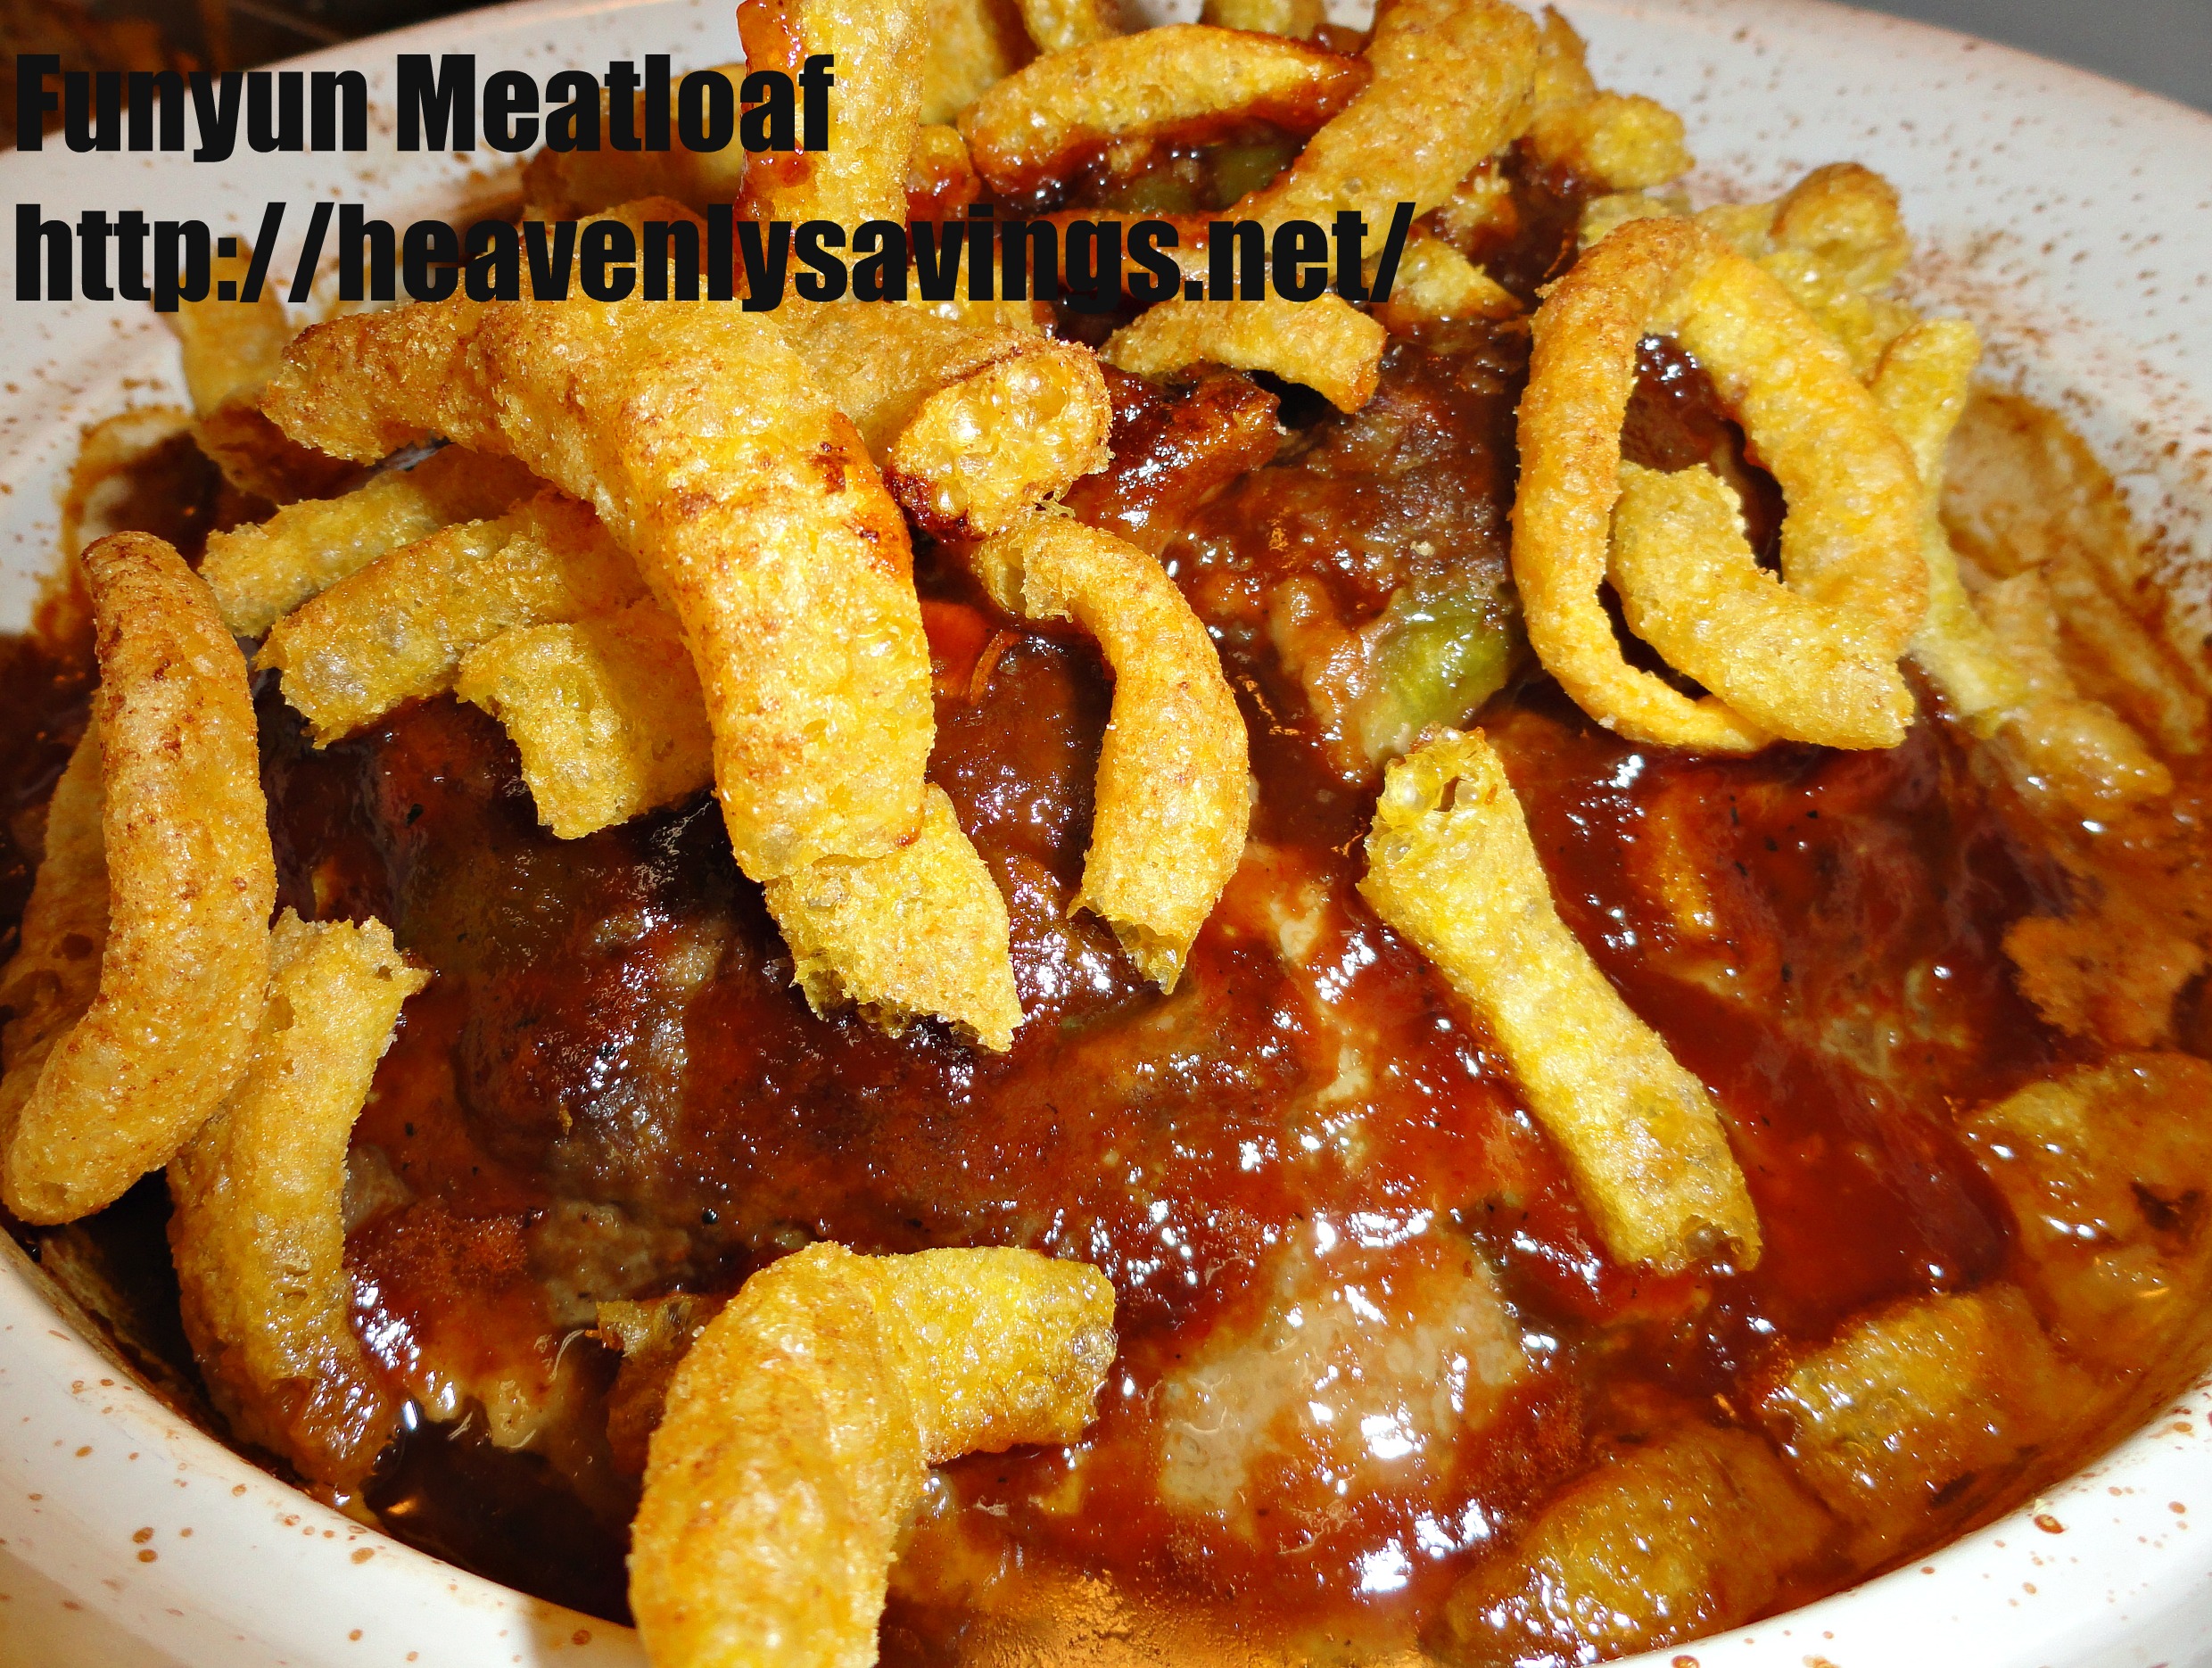 Otto’s BBQ Funyun Meatloaf